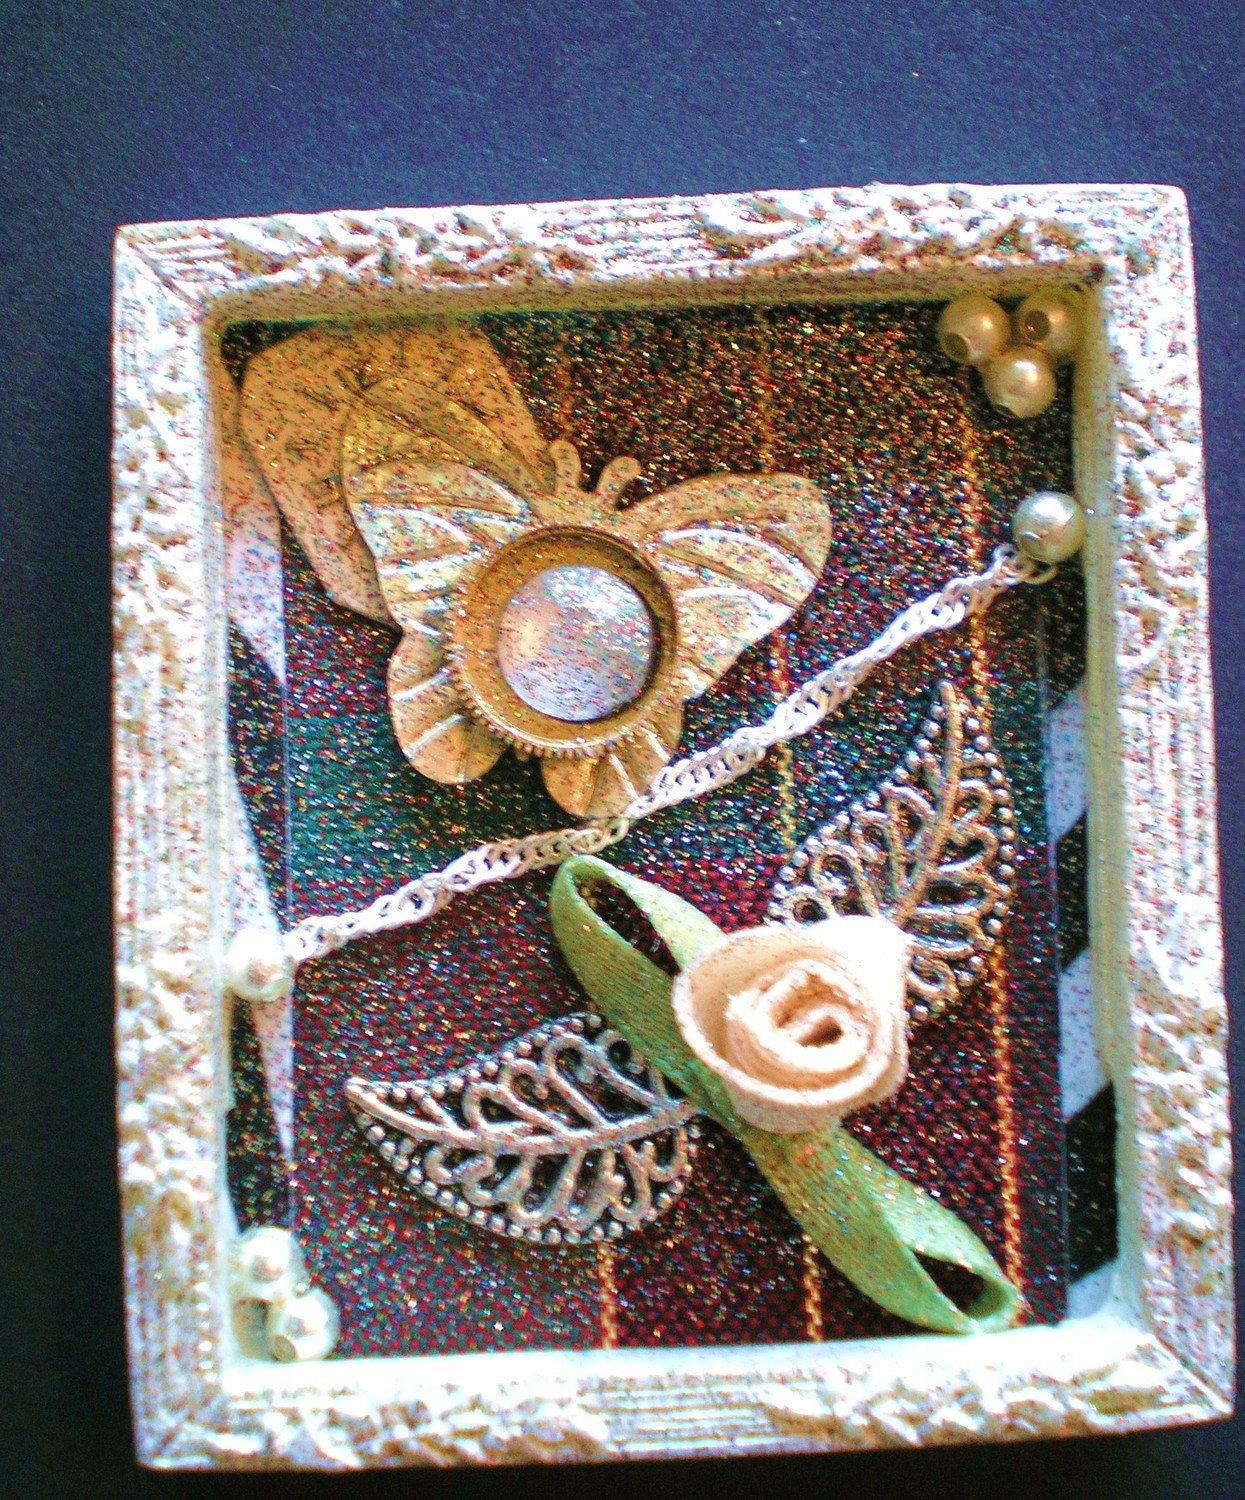 IMMEMORIAL  - Tiny Collage Mixed Media OOAK Framed Signed with Beads Flowers Silver Chain